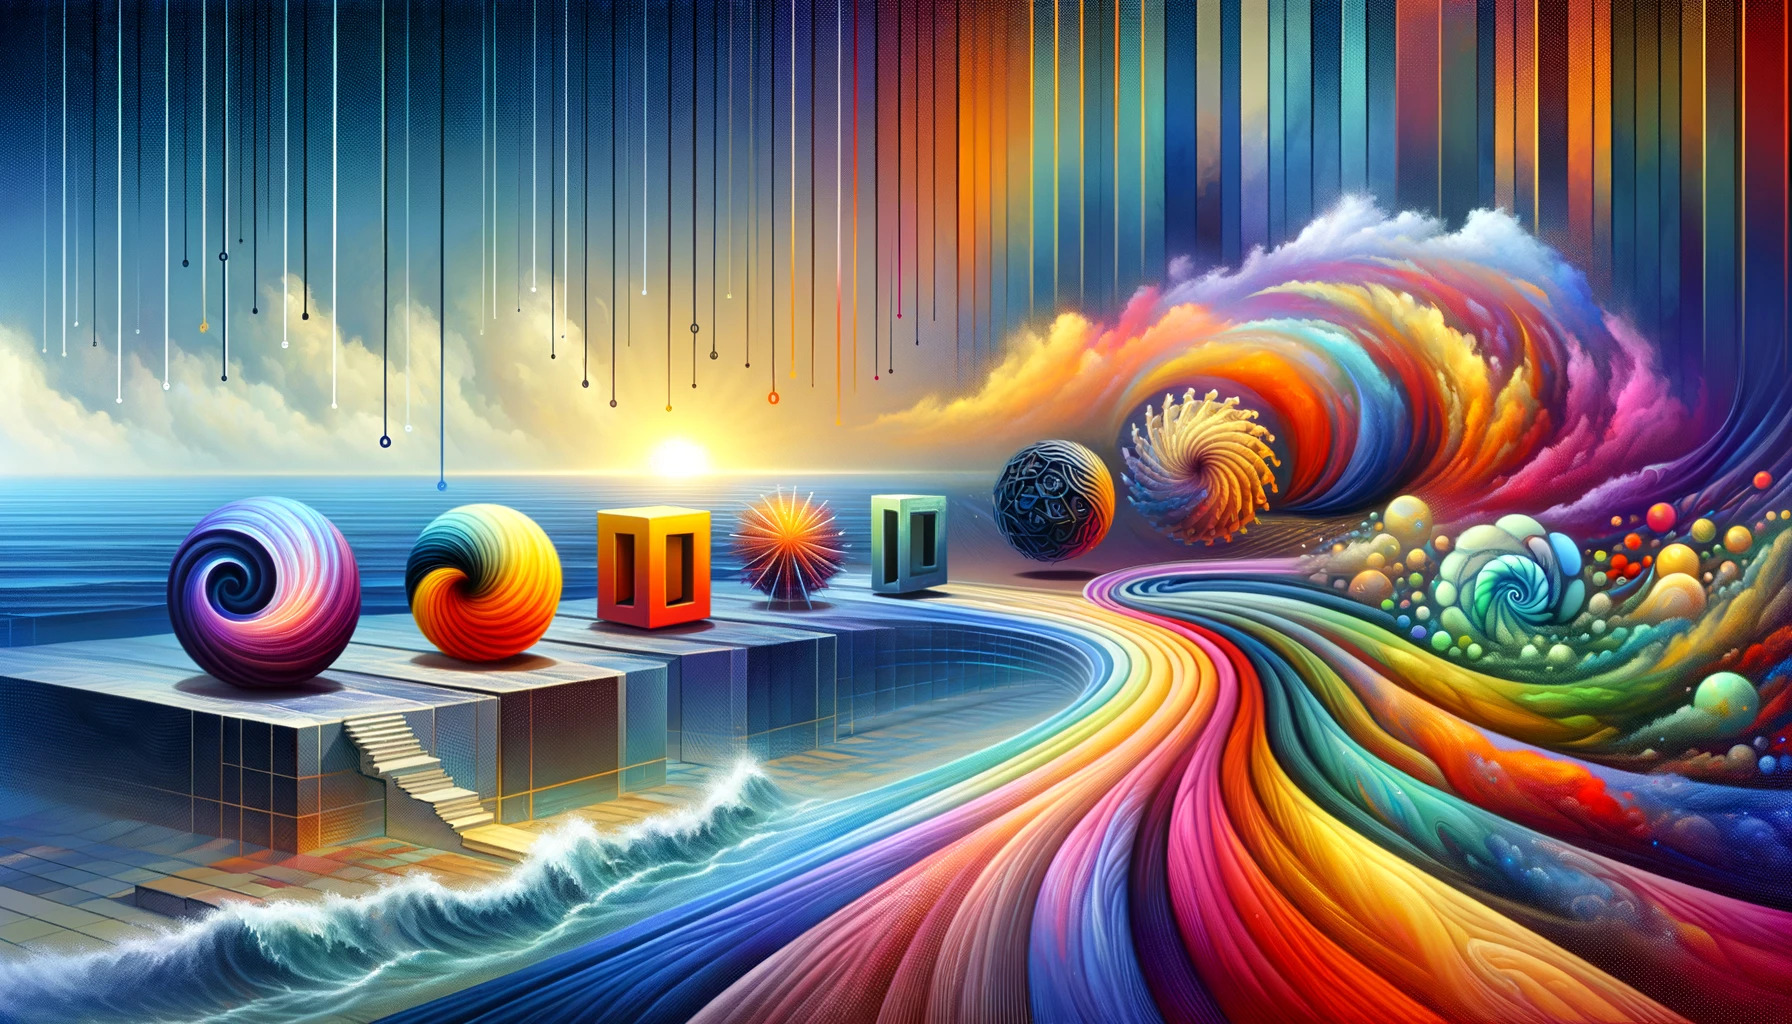 a vibrant and dynamic scene that abstractly represents the concept of 5-letter words ending in "o". The image features a series of colorful objects arranged to symbolize the progression towards the final "o", set against a backdrop that blurs the line between reality and imagination. This artistic interpretation captures the essence of the concept, focusing on creativity and diversity without directly depicting any specific word. (5 Letter Words Ending in O)